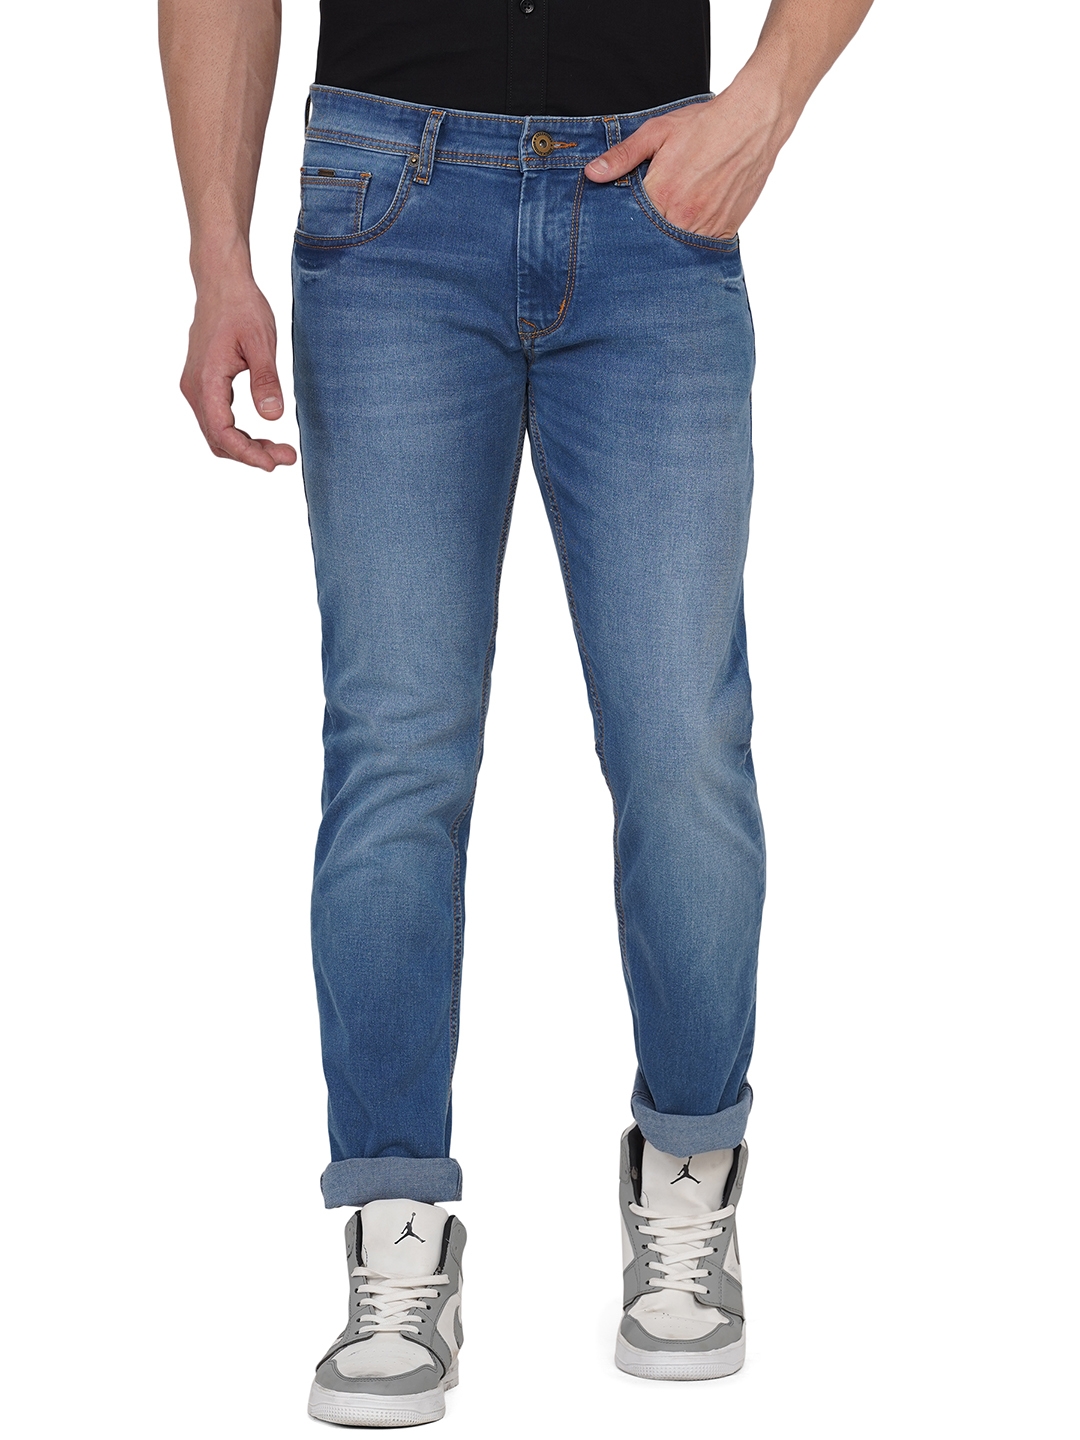 Greenfibre | River Blue Washed Straight Fit Jeans | Greenfibre 0